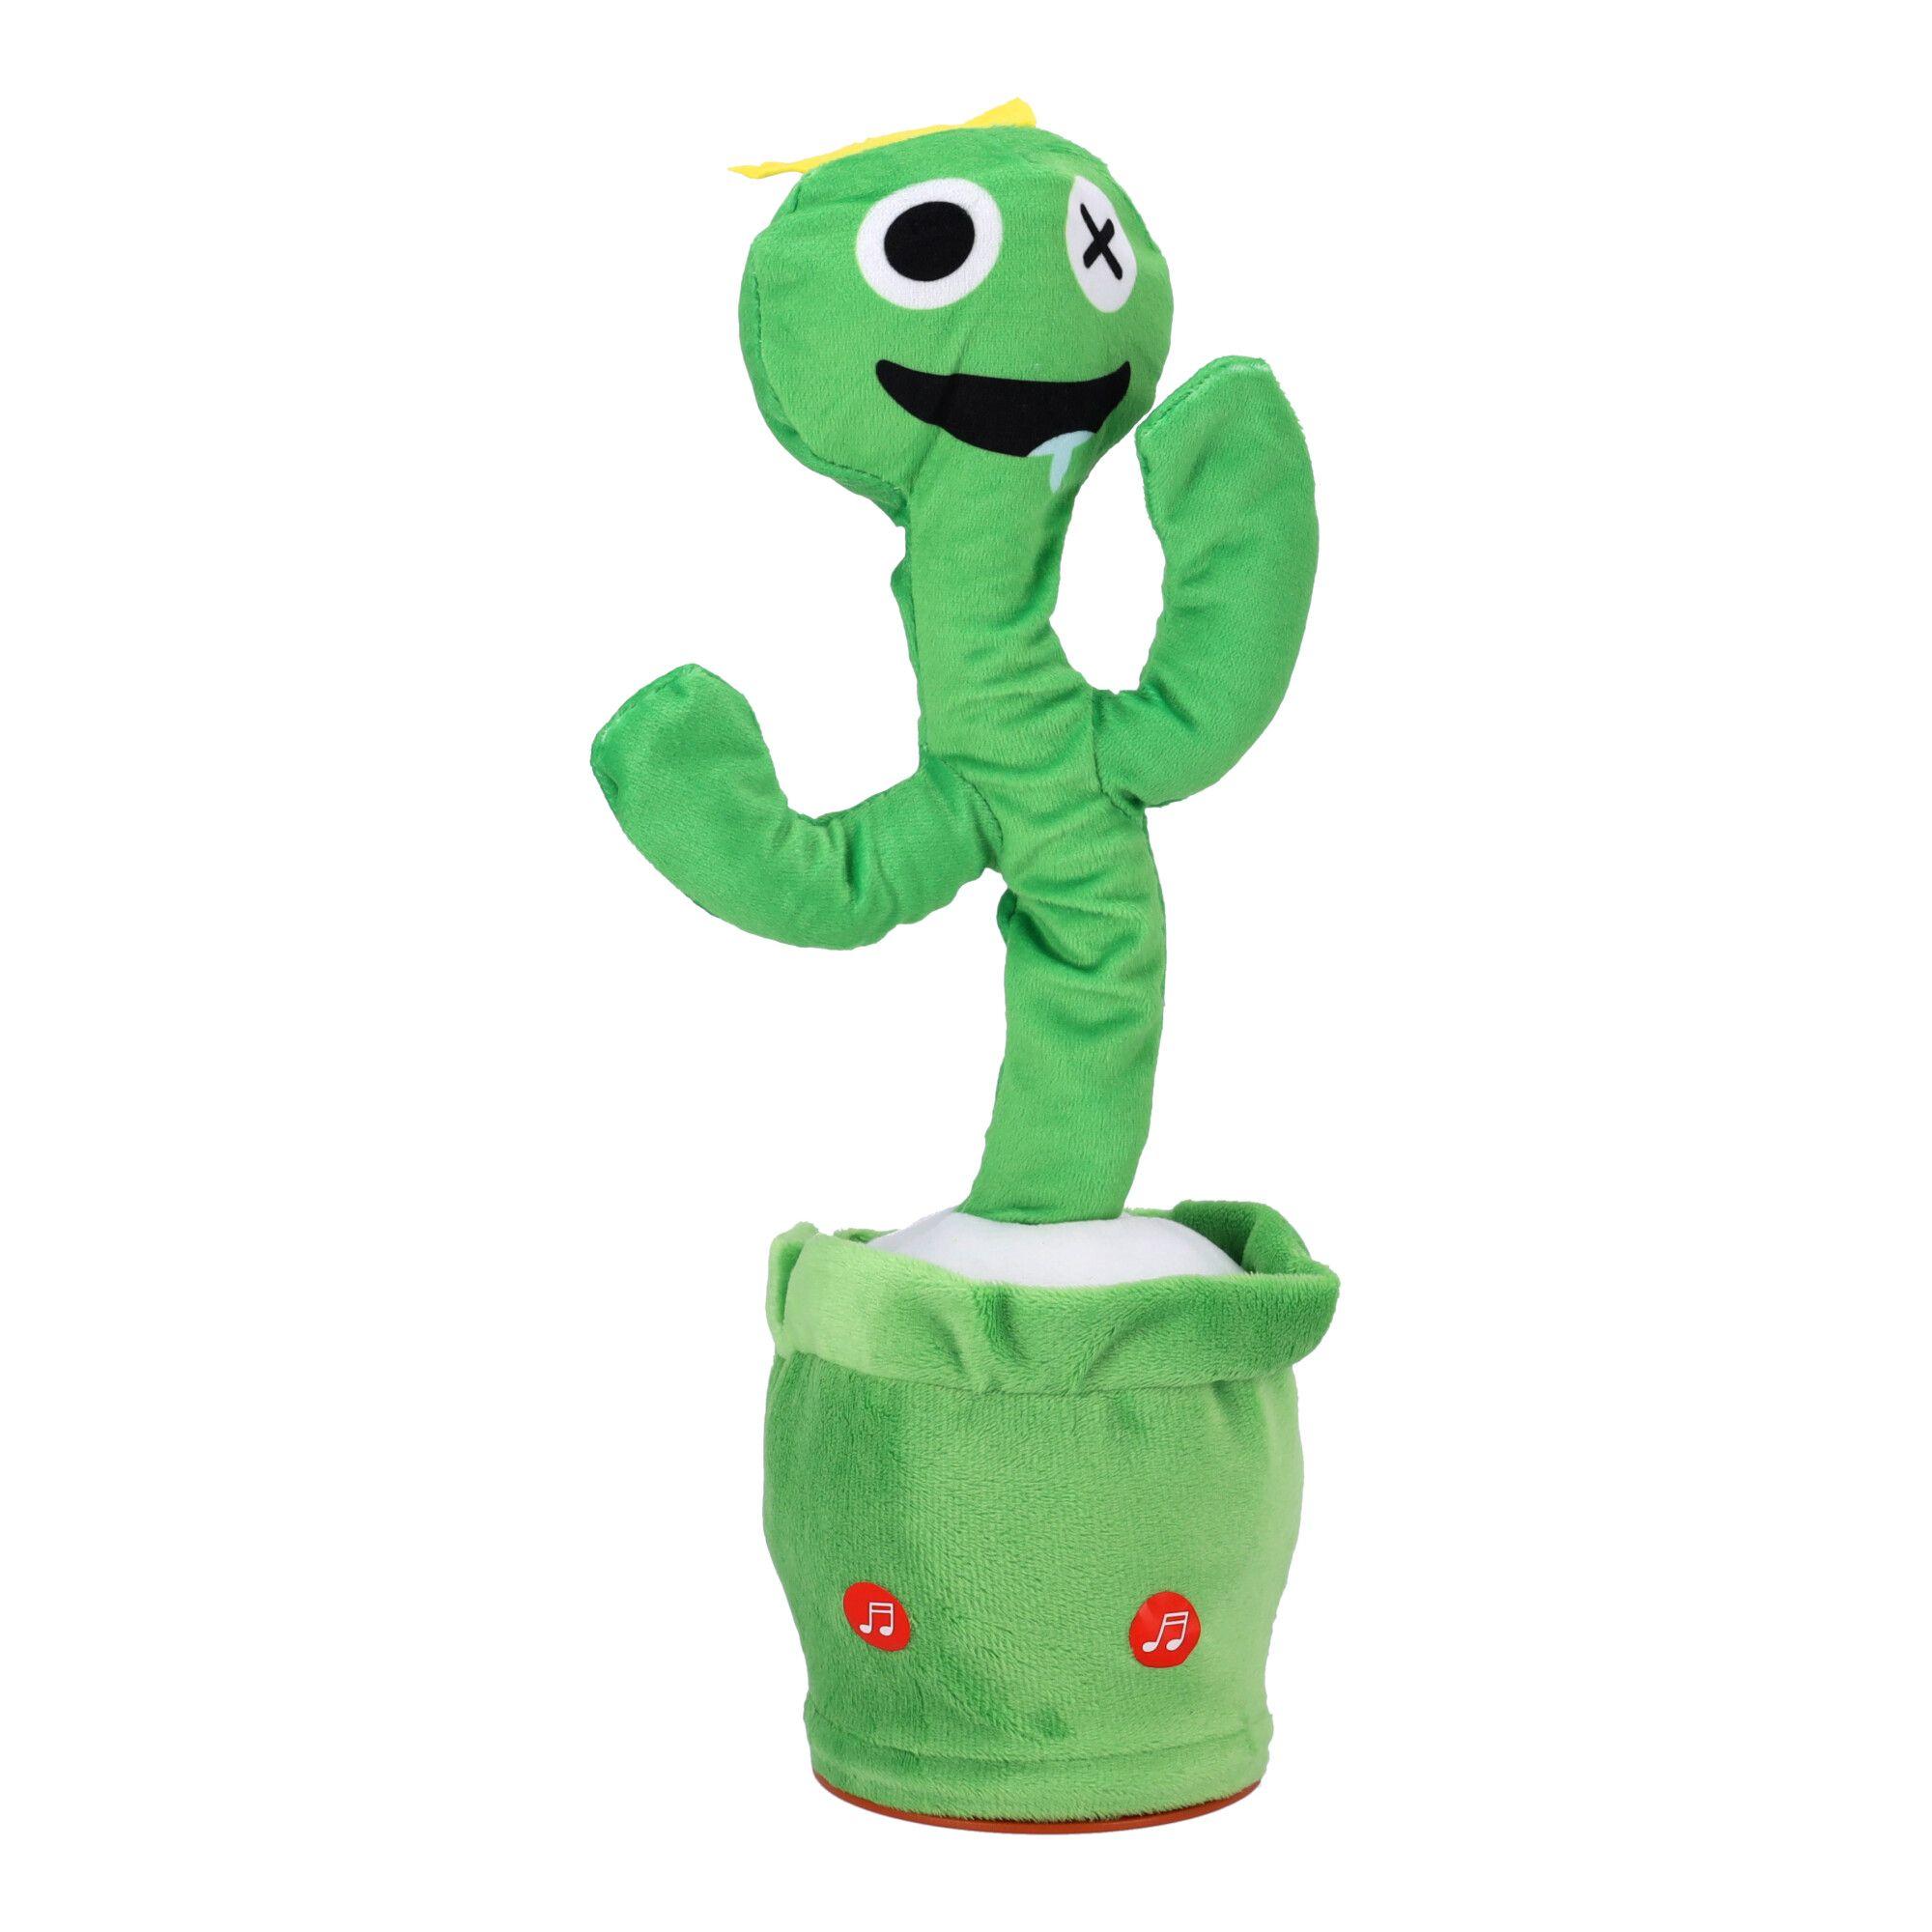 Children's toy - Dancing and singing ROBLOX RAINBOW FRIENDS mascot - green.